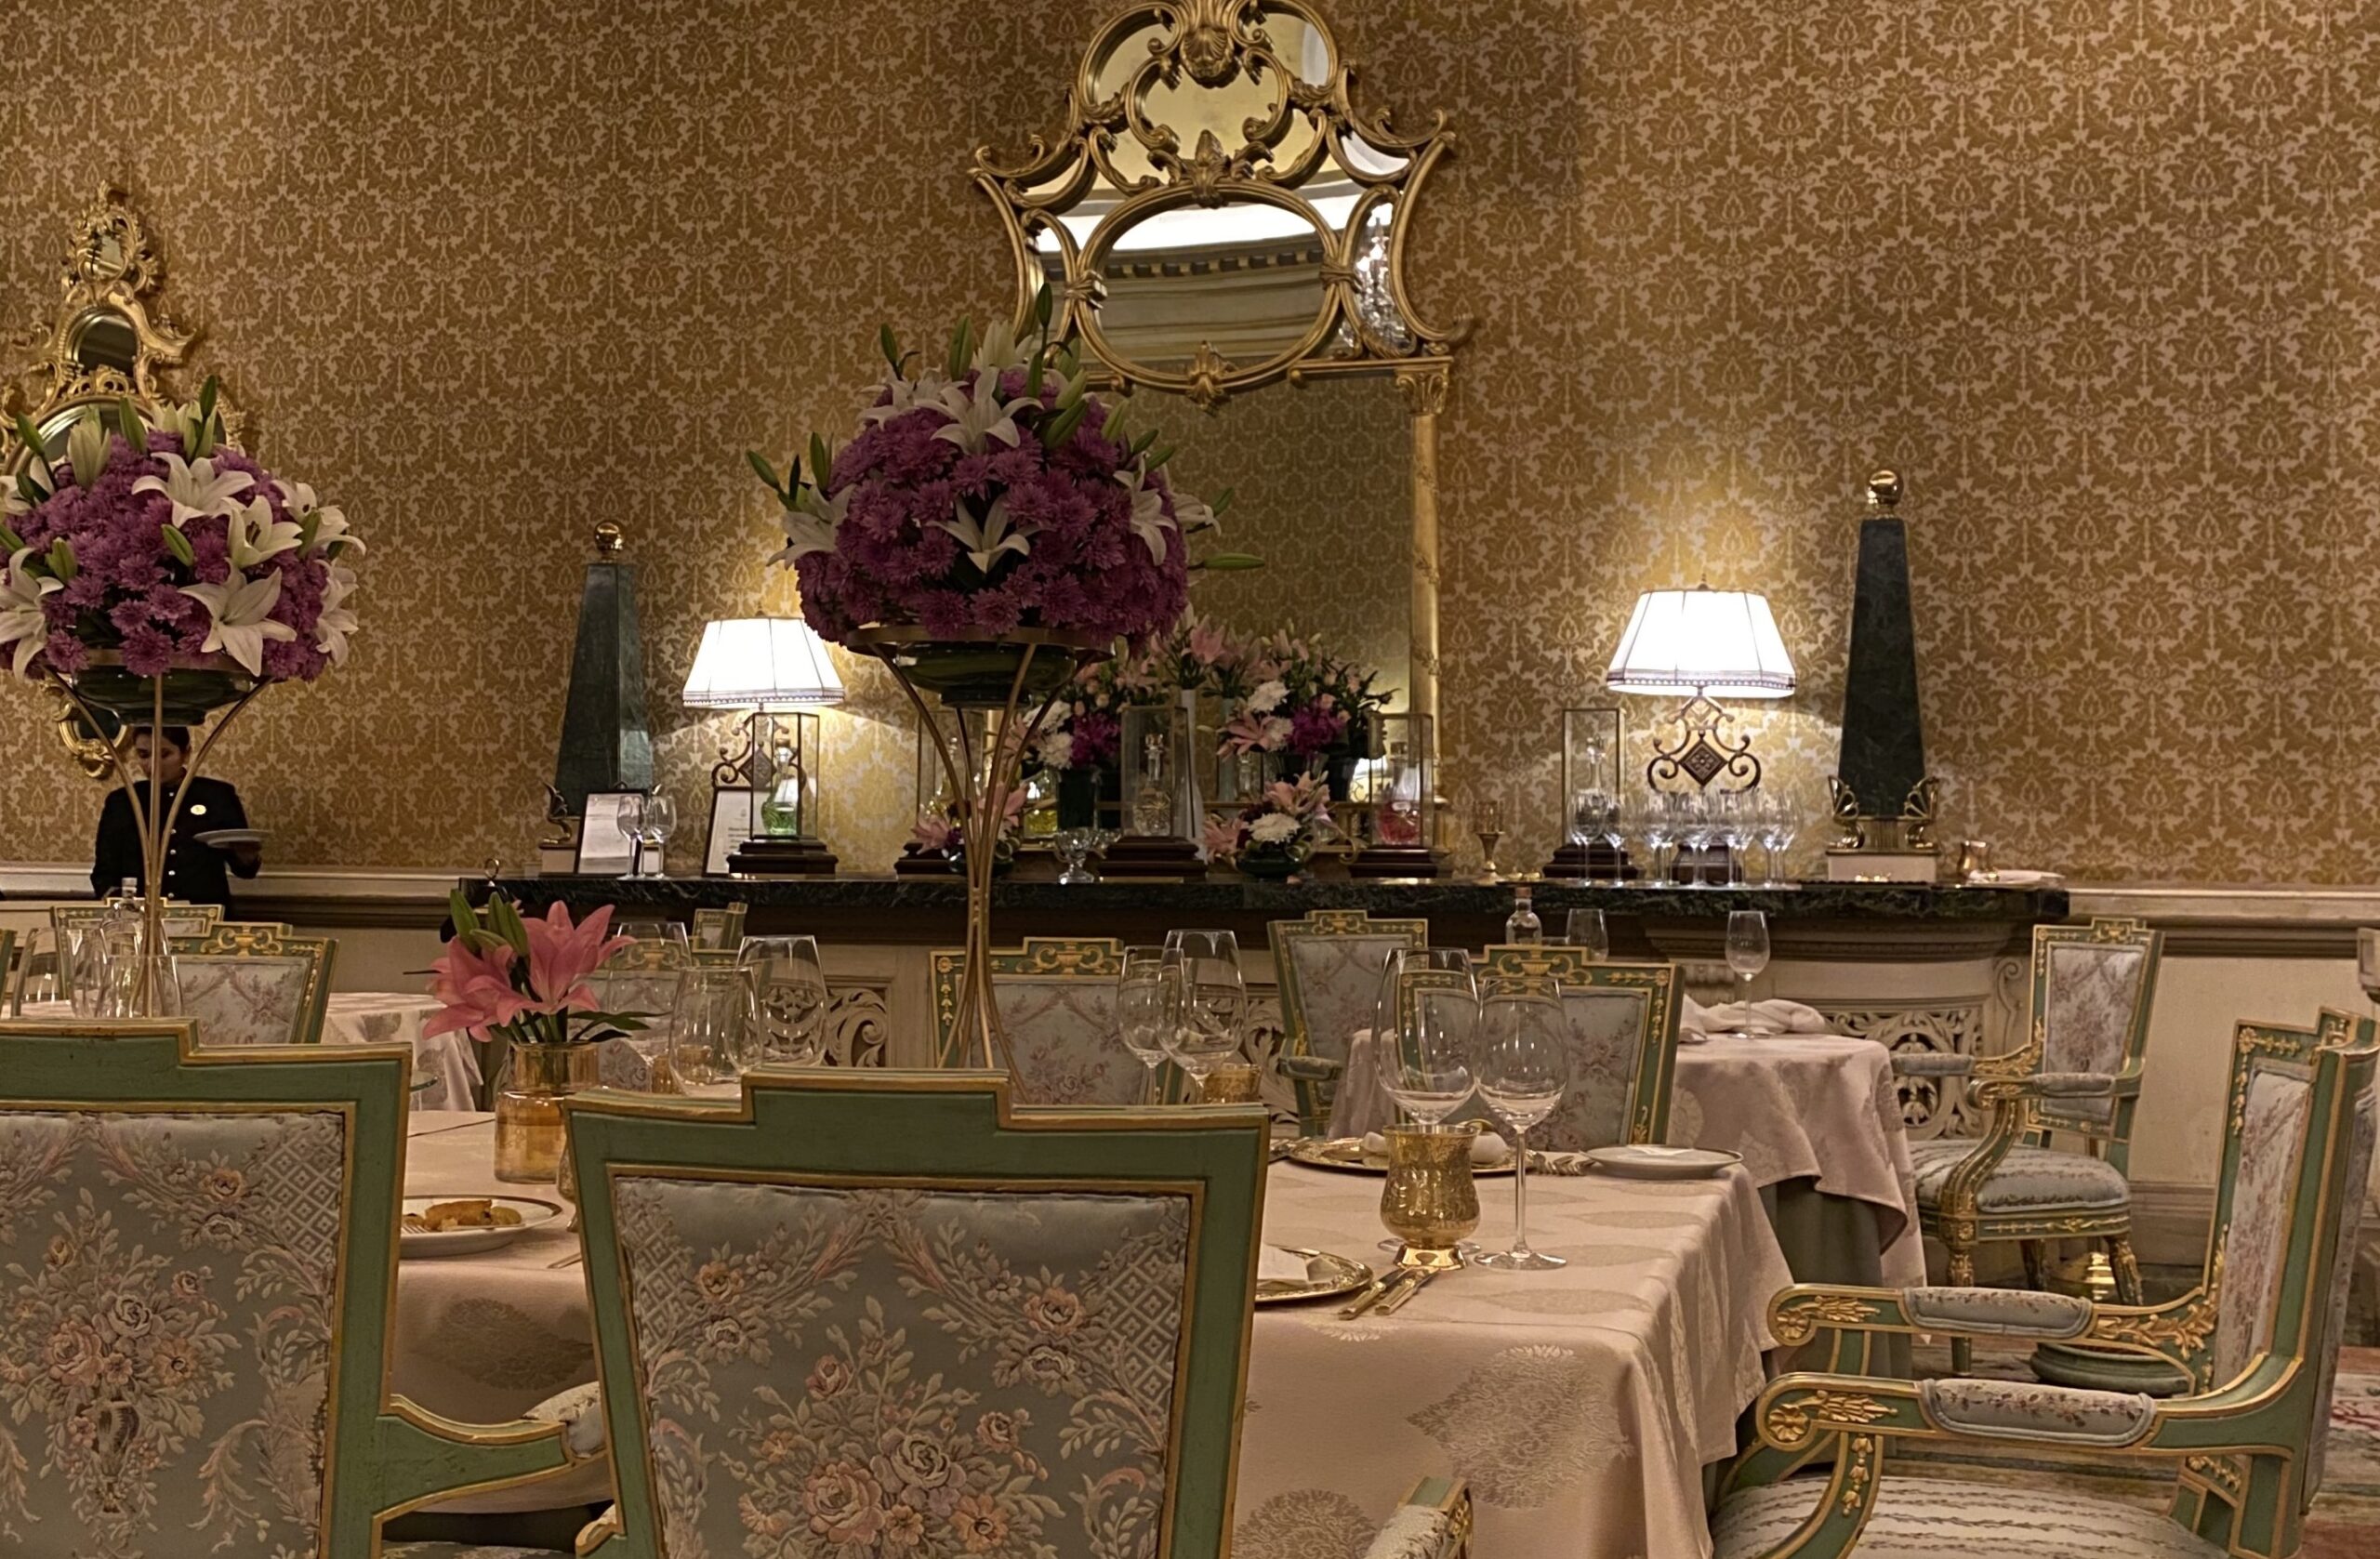 Image shows opulent gilded room with table set with gold plated tableware and flowers